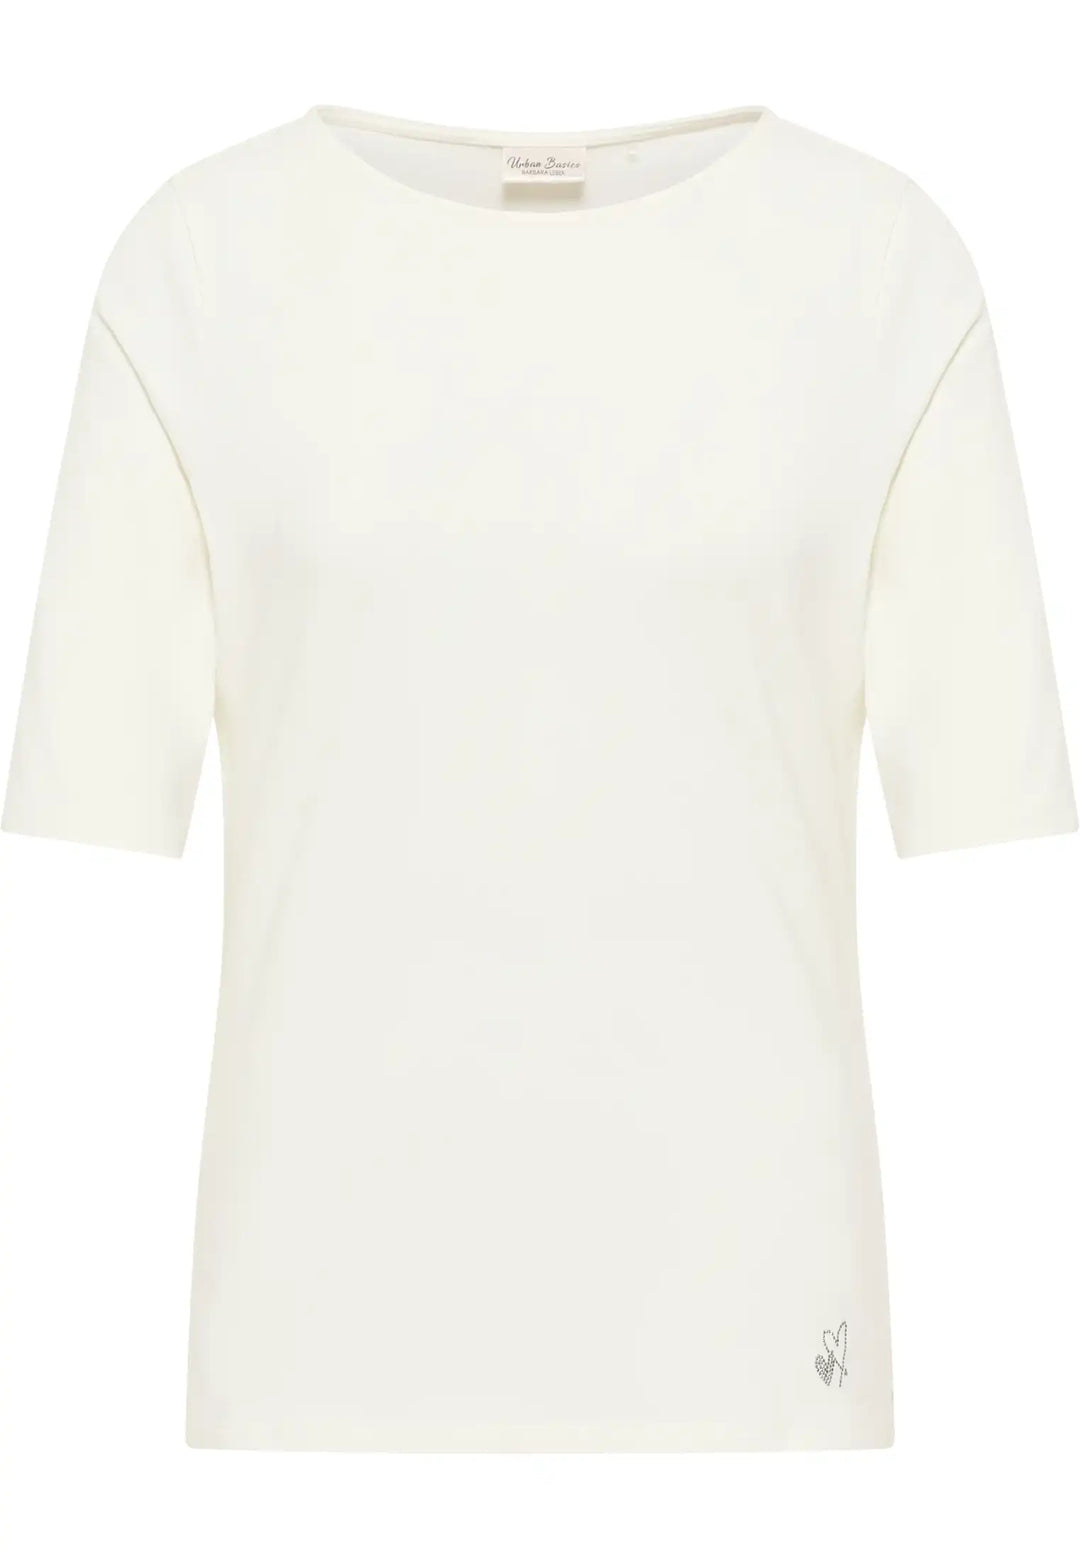 Cream short-sleeve top with boat neckline and subtle logo detail, style 65090042-120